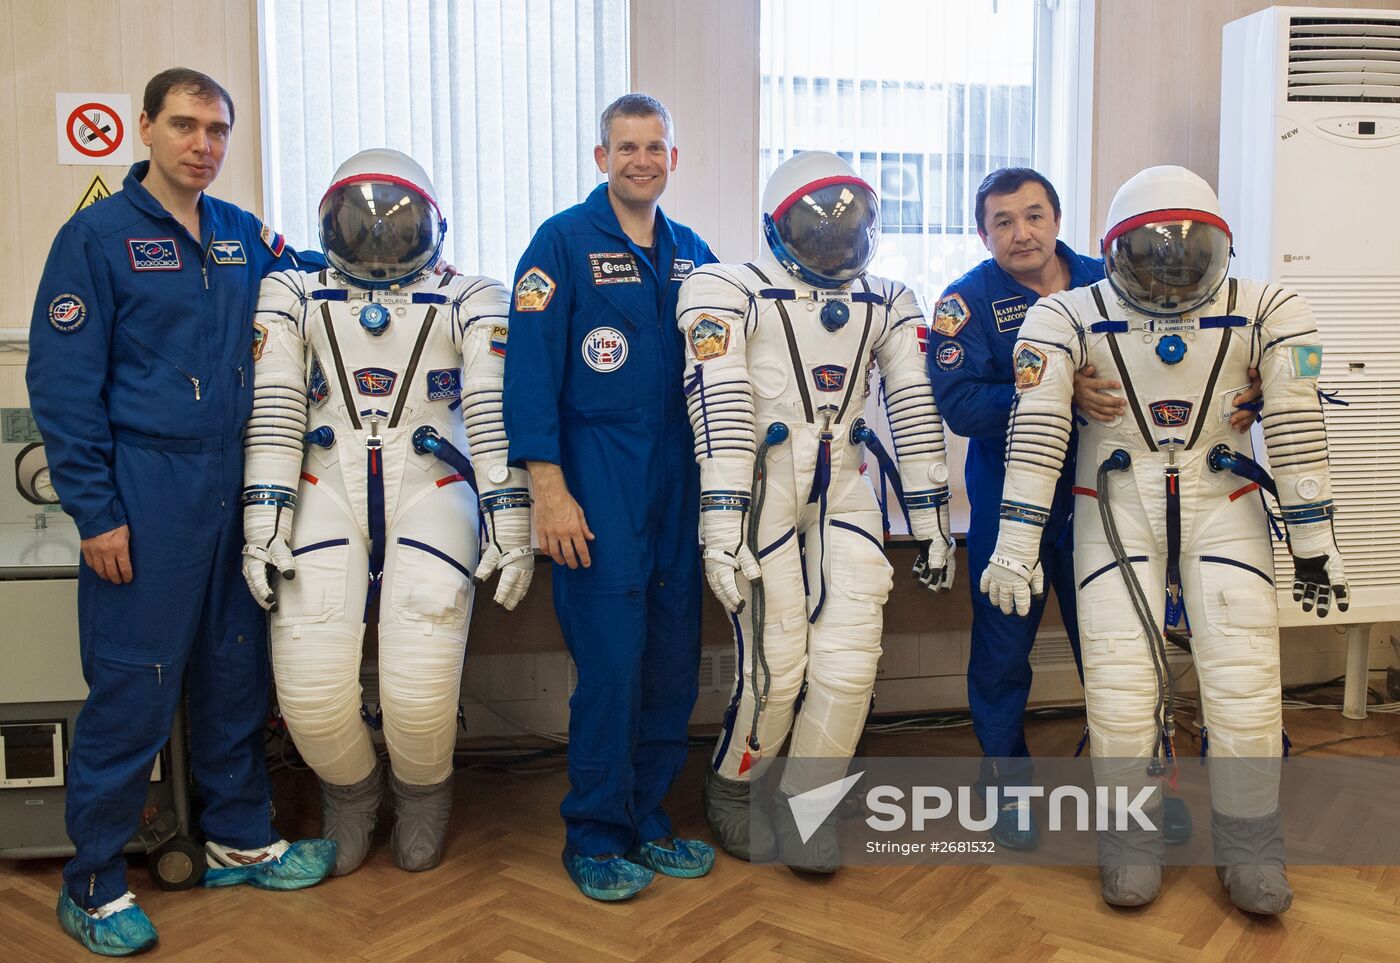 ISS-45/46 and Visiting Expedition 18 primary crew try on space suits and inspect space ship